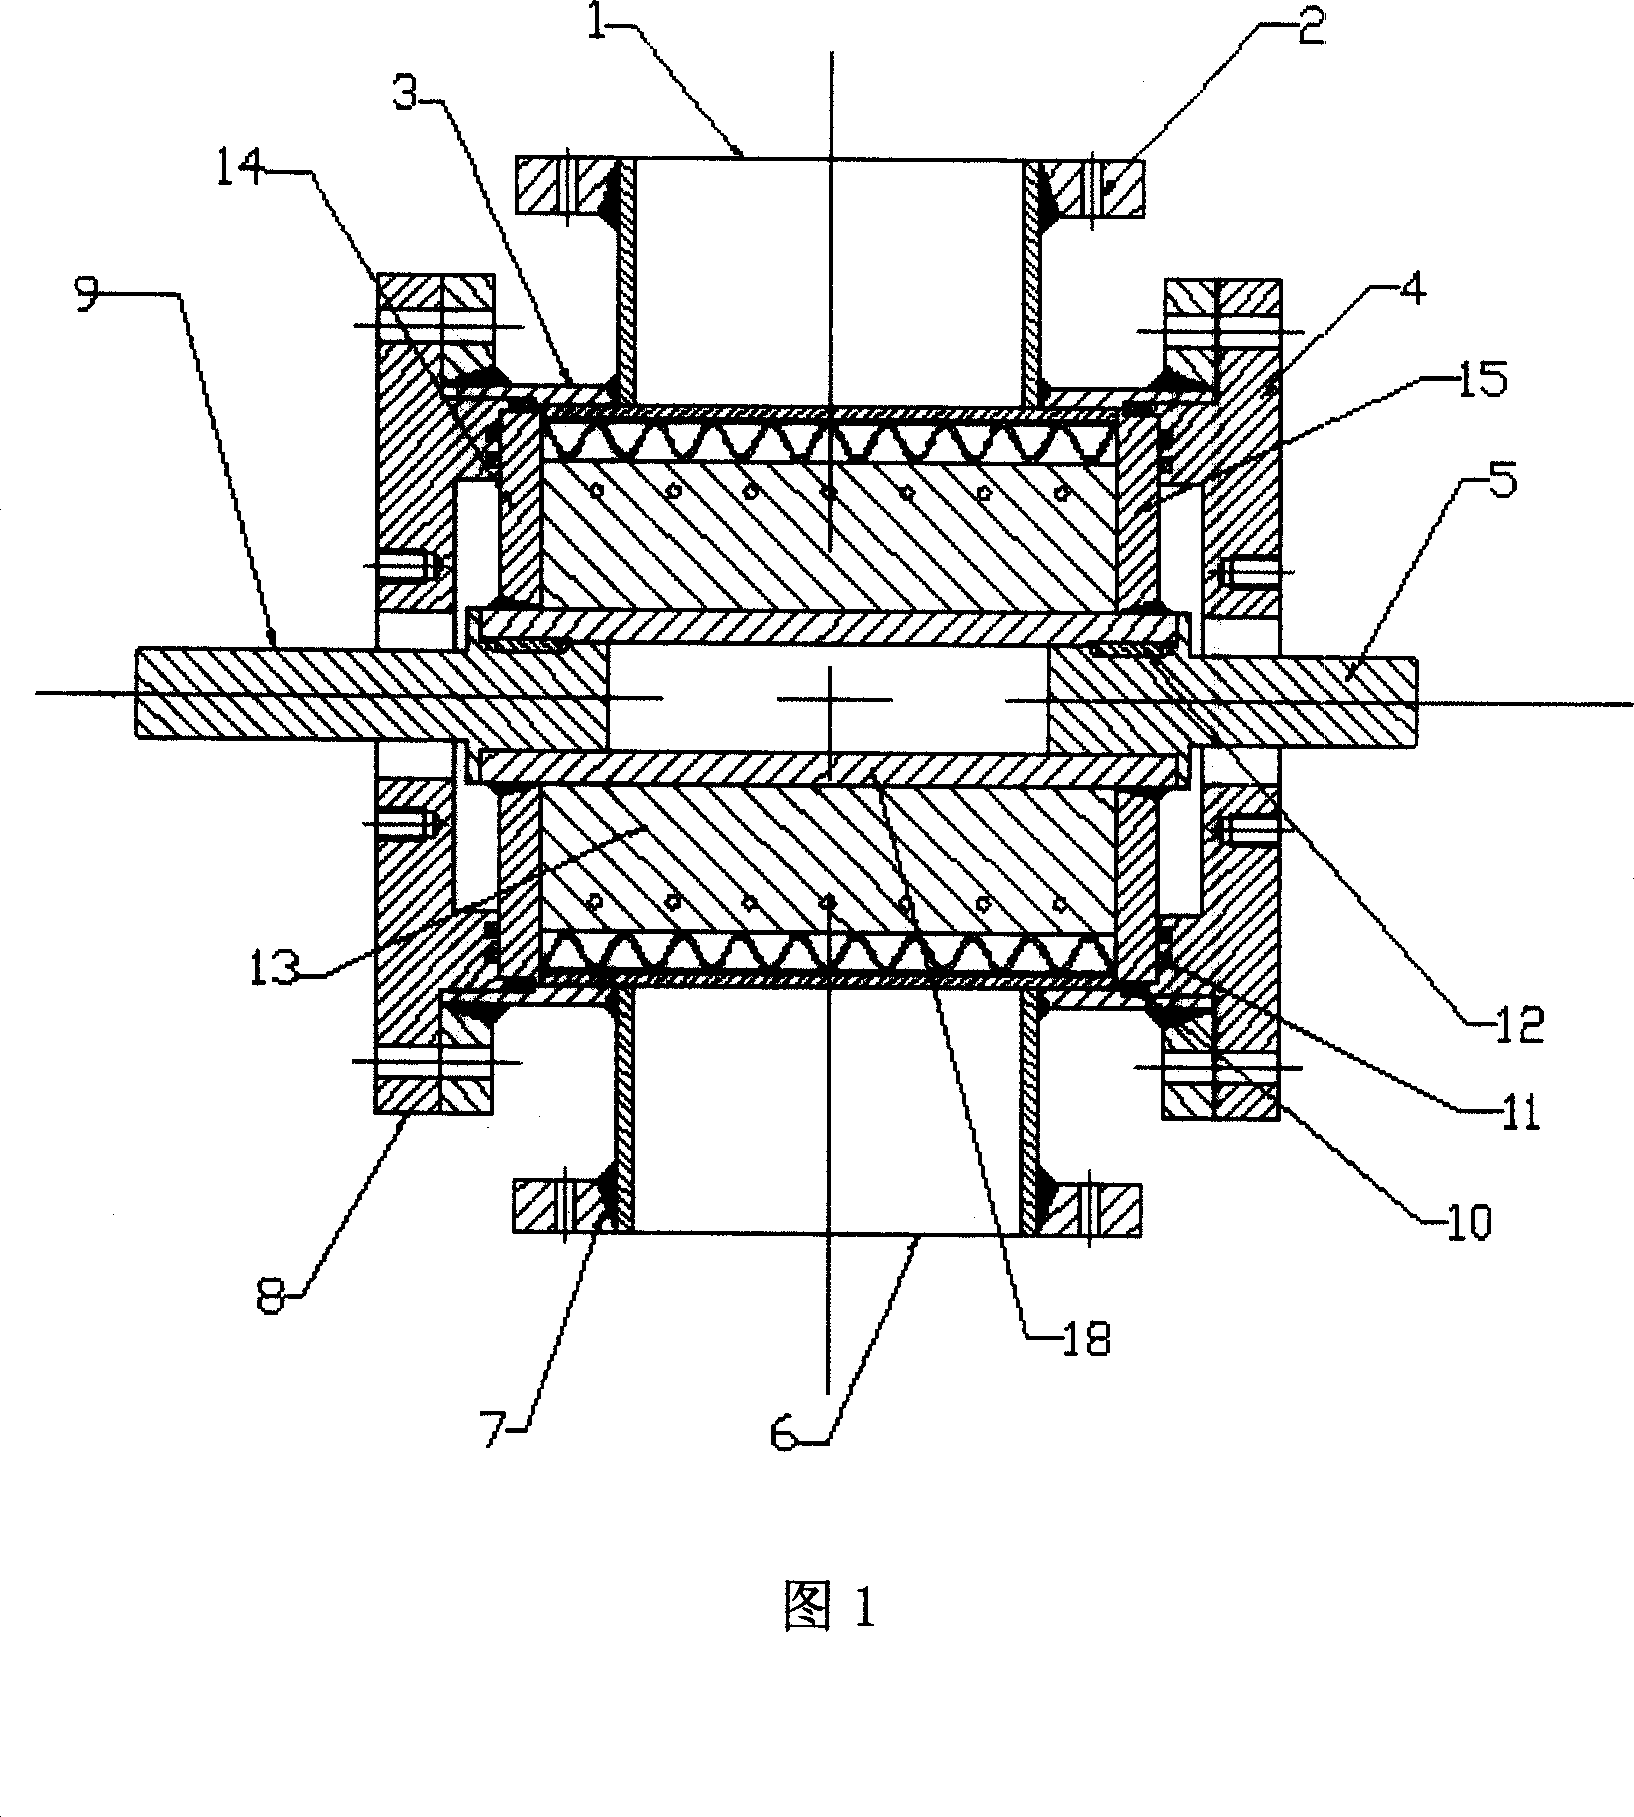 High-temperature and high-pressure wheeled continuous feeding airlock system